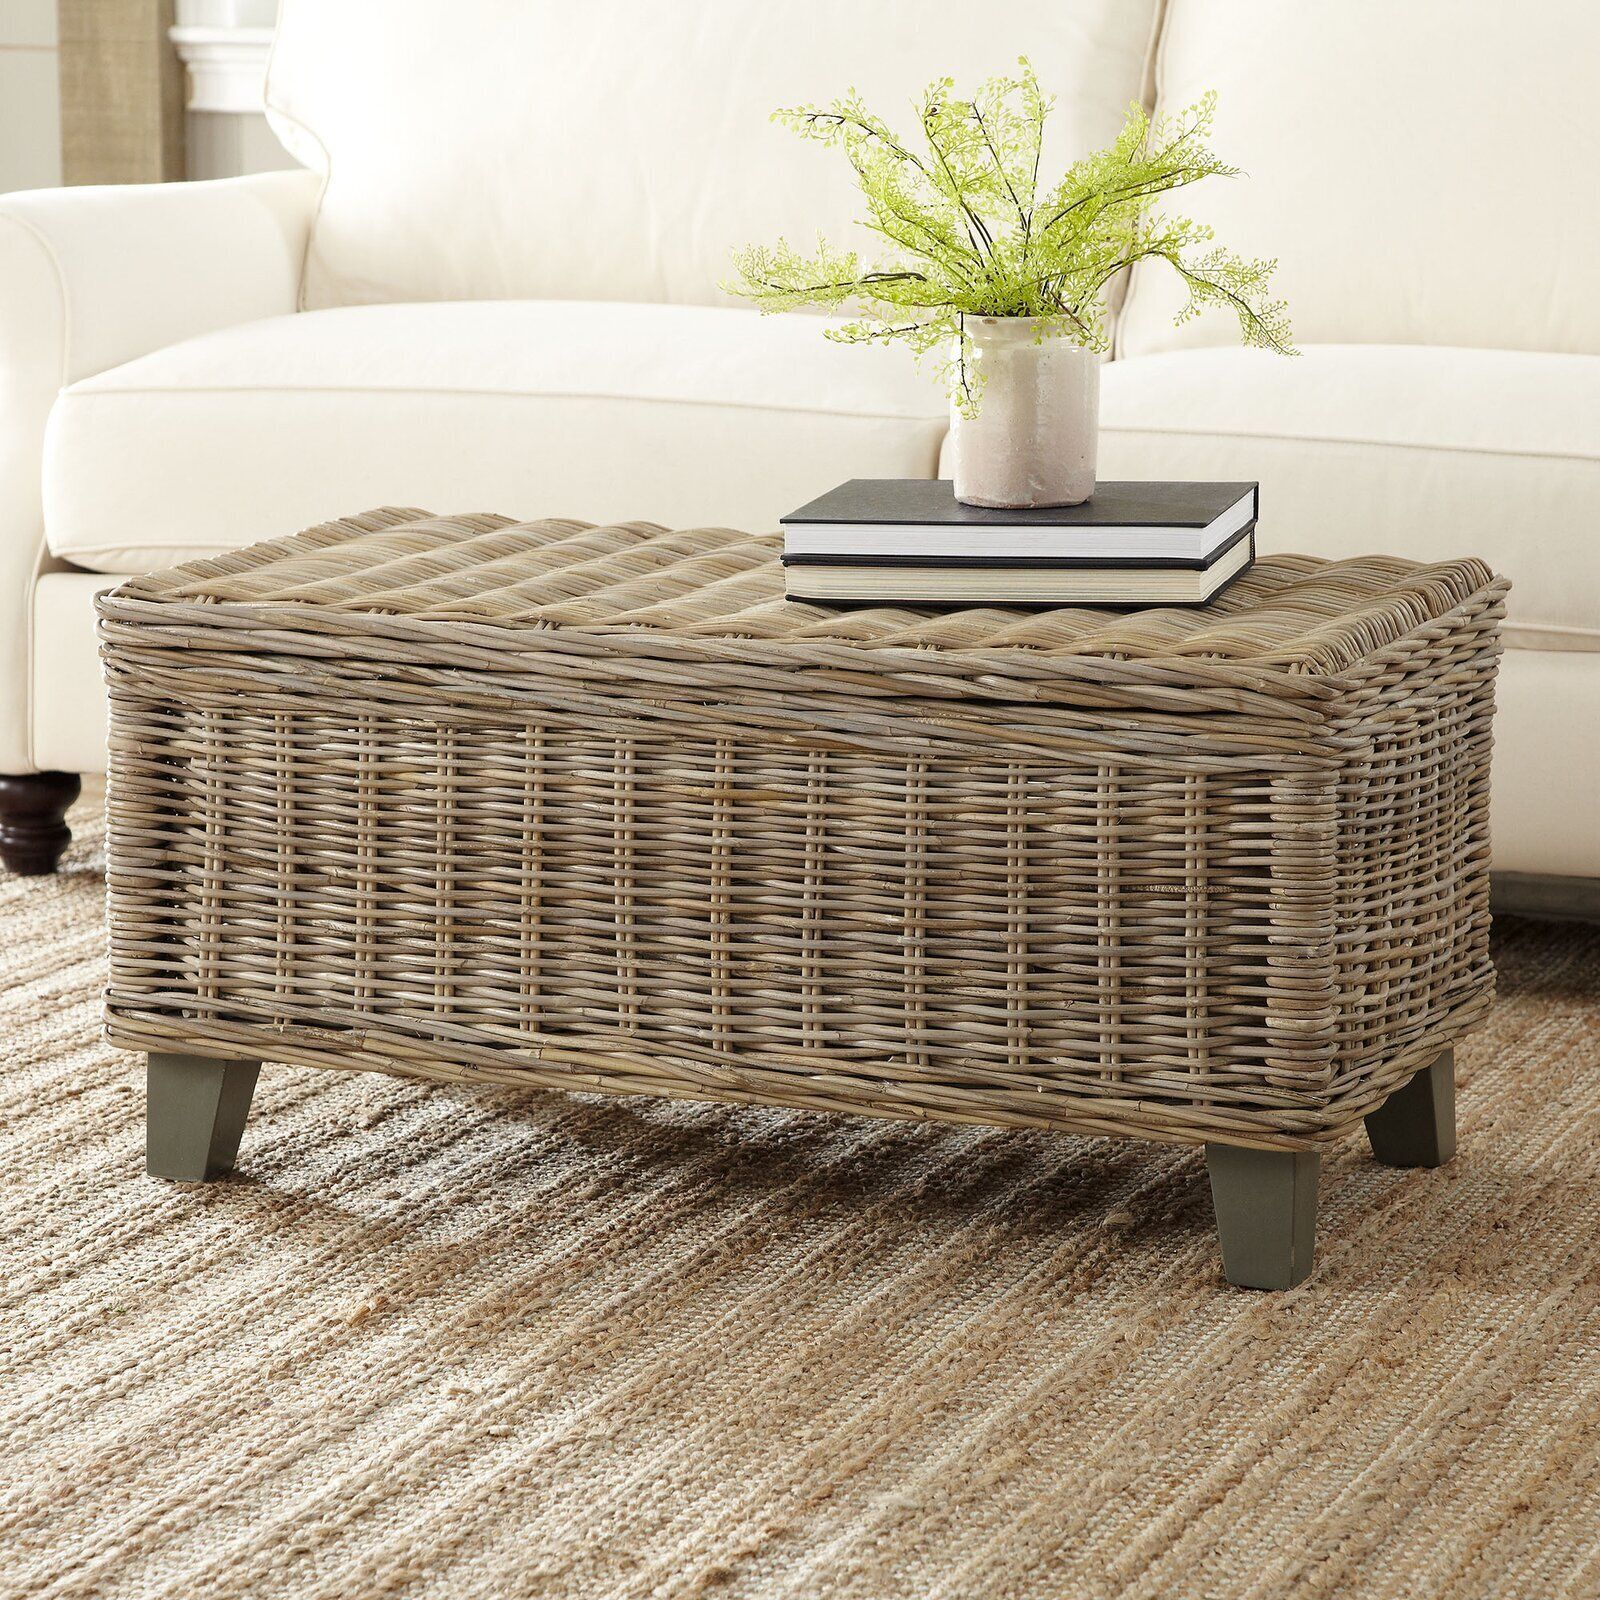 Rattan Coffee Tables – Foter In Rattan Coffee Tables (View 2 of 15)